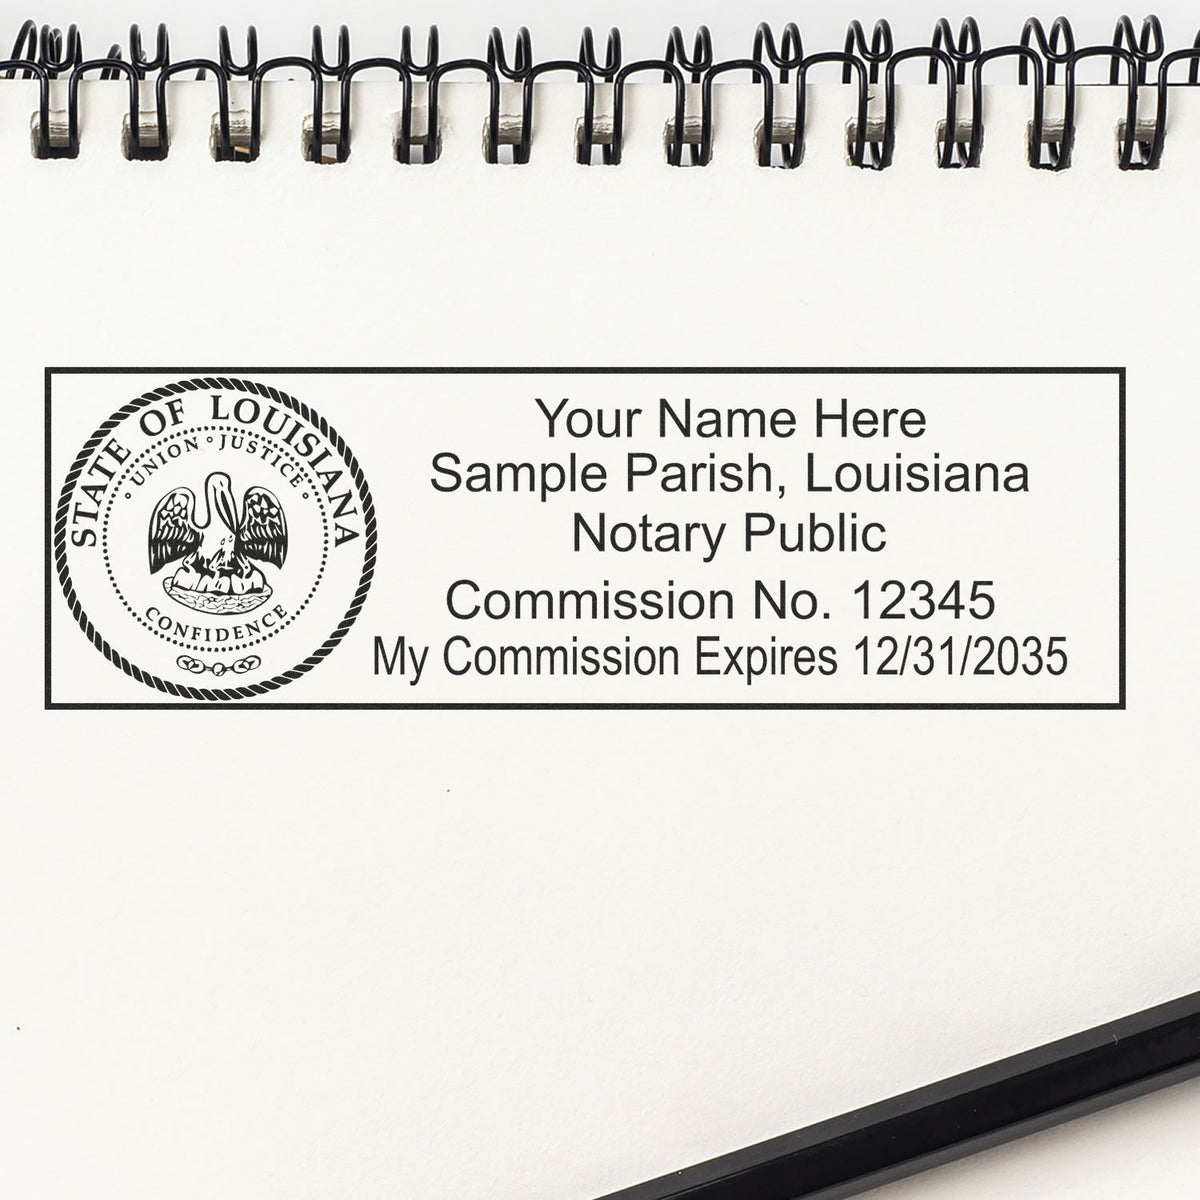 The main image for the Wooden Handle Louisiana State Seal Notary Public Stamp depicting a sample of the imprint and electronic files